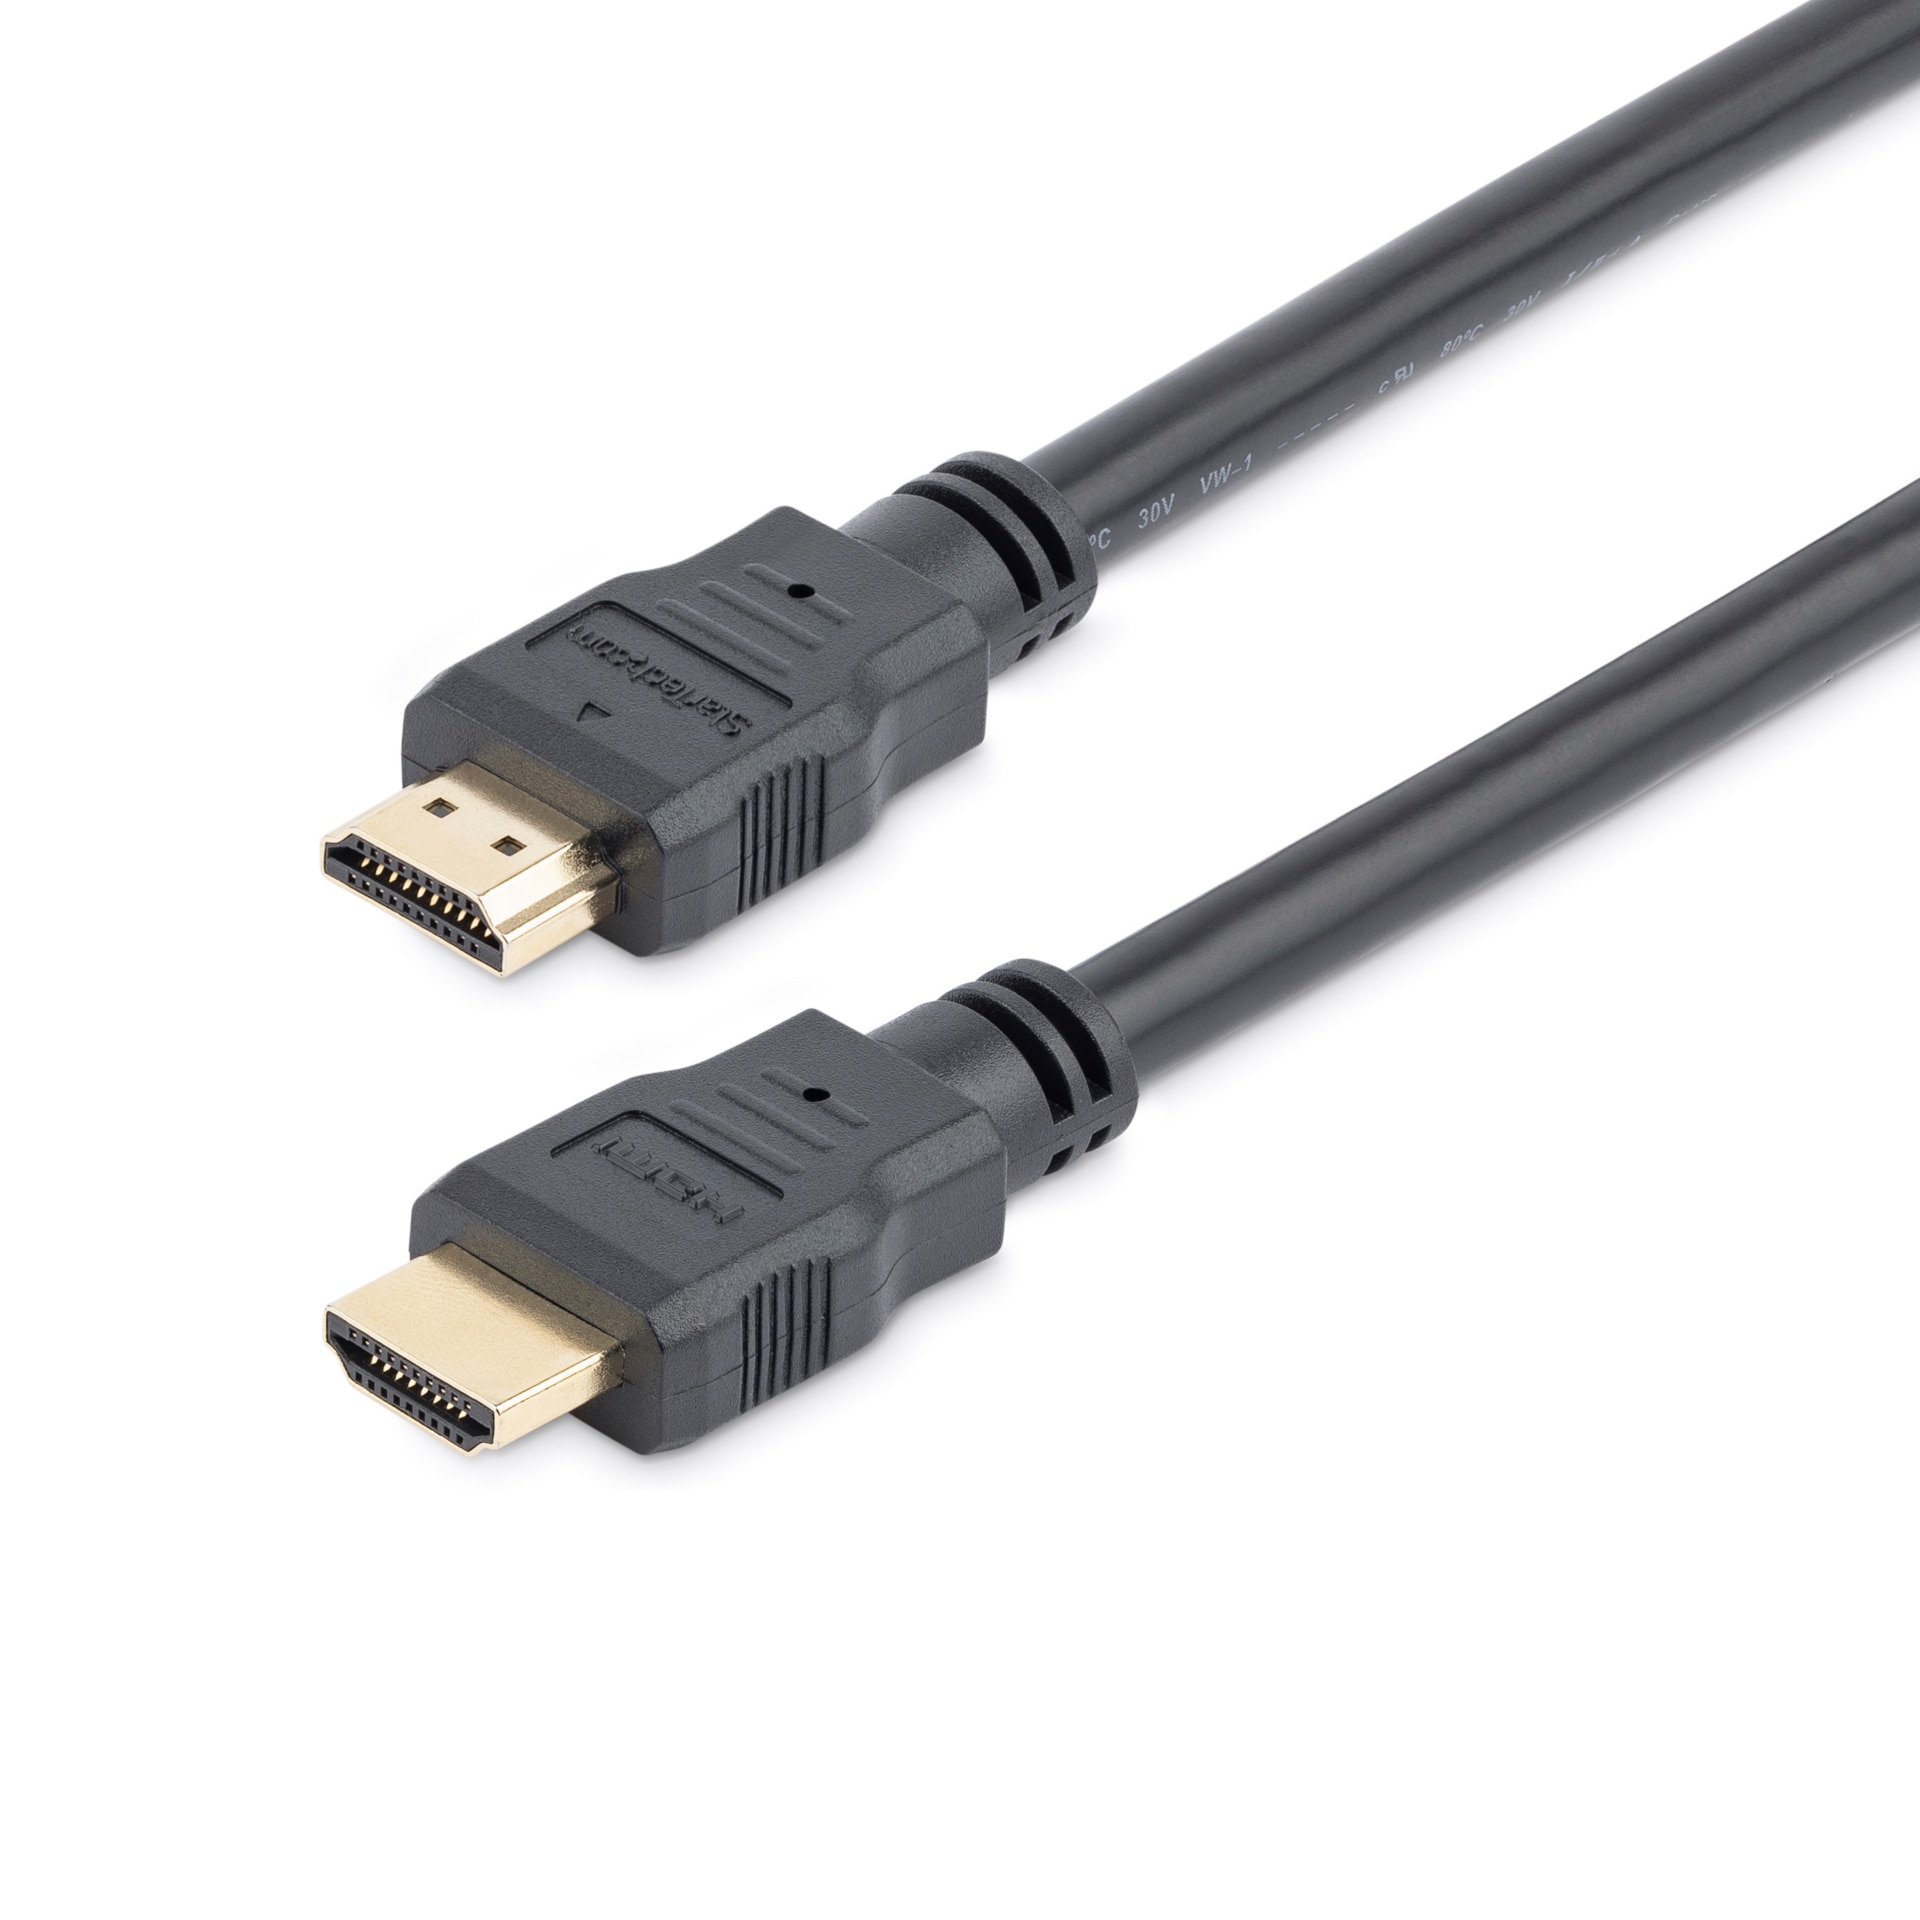 5m HDMI Cable 4K High Speed with Ethernet